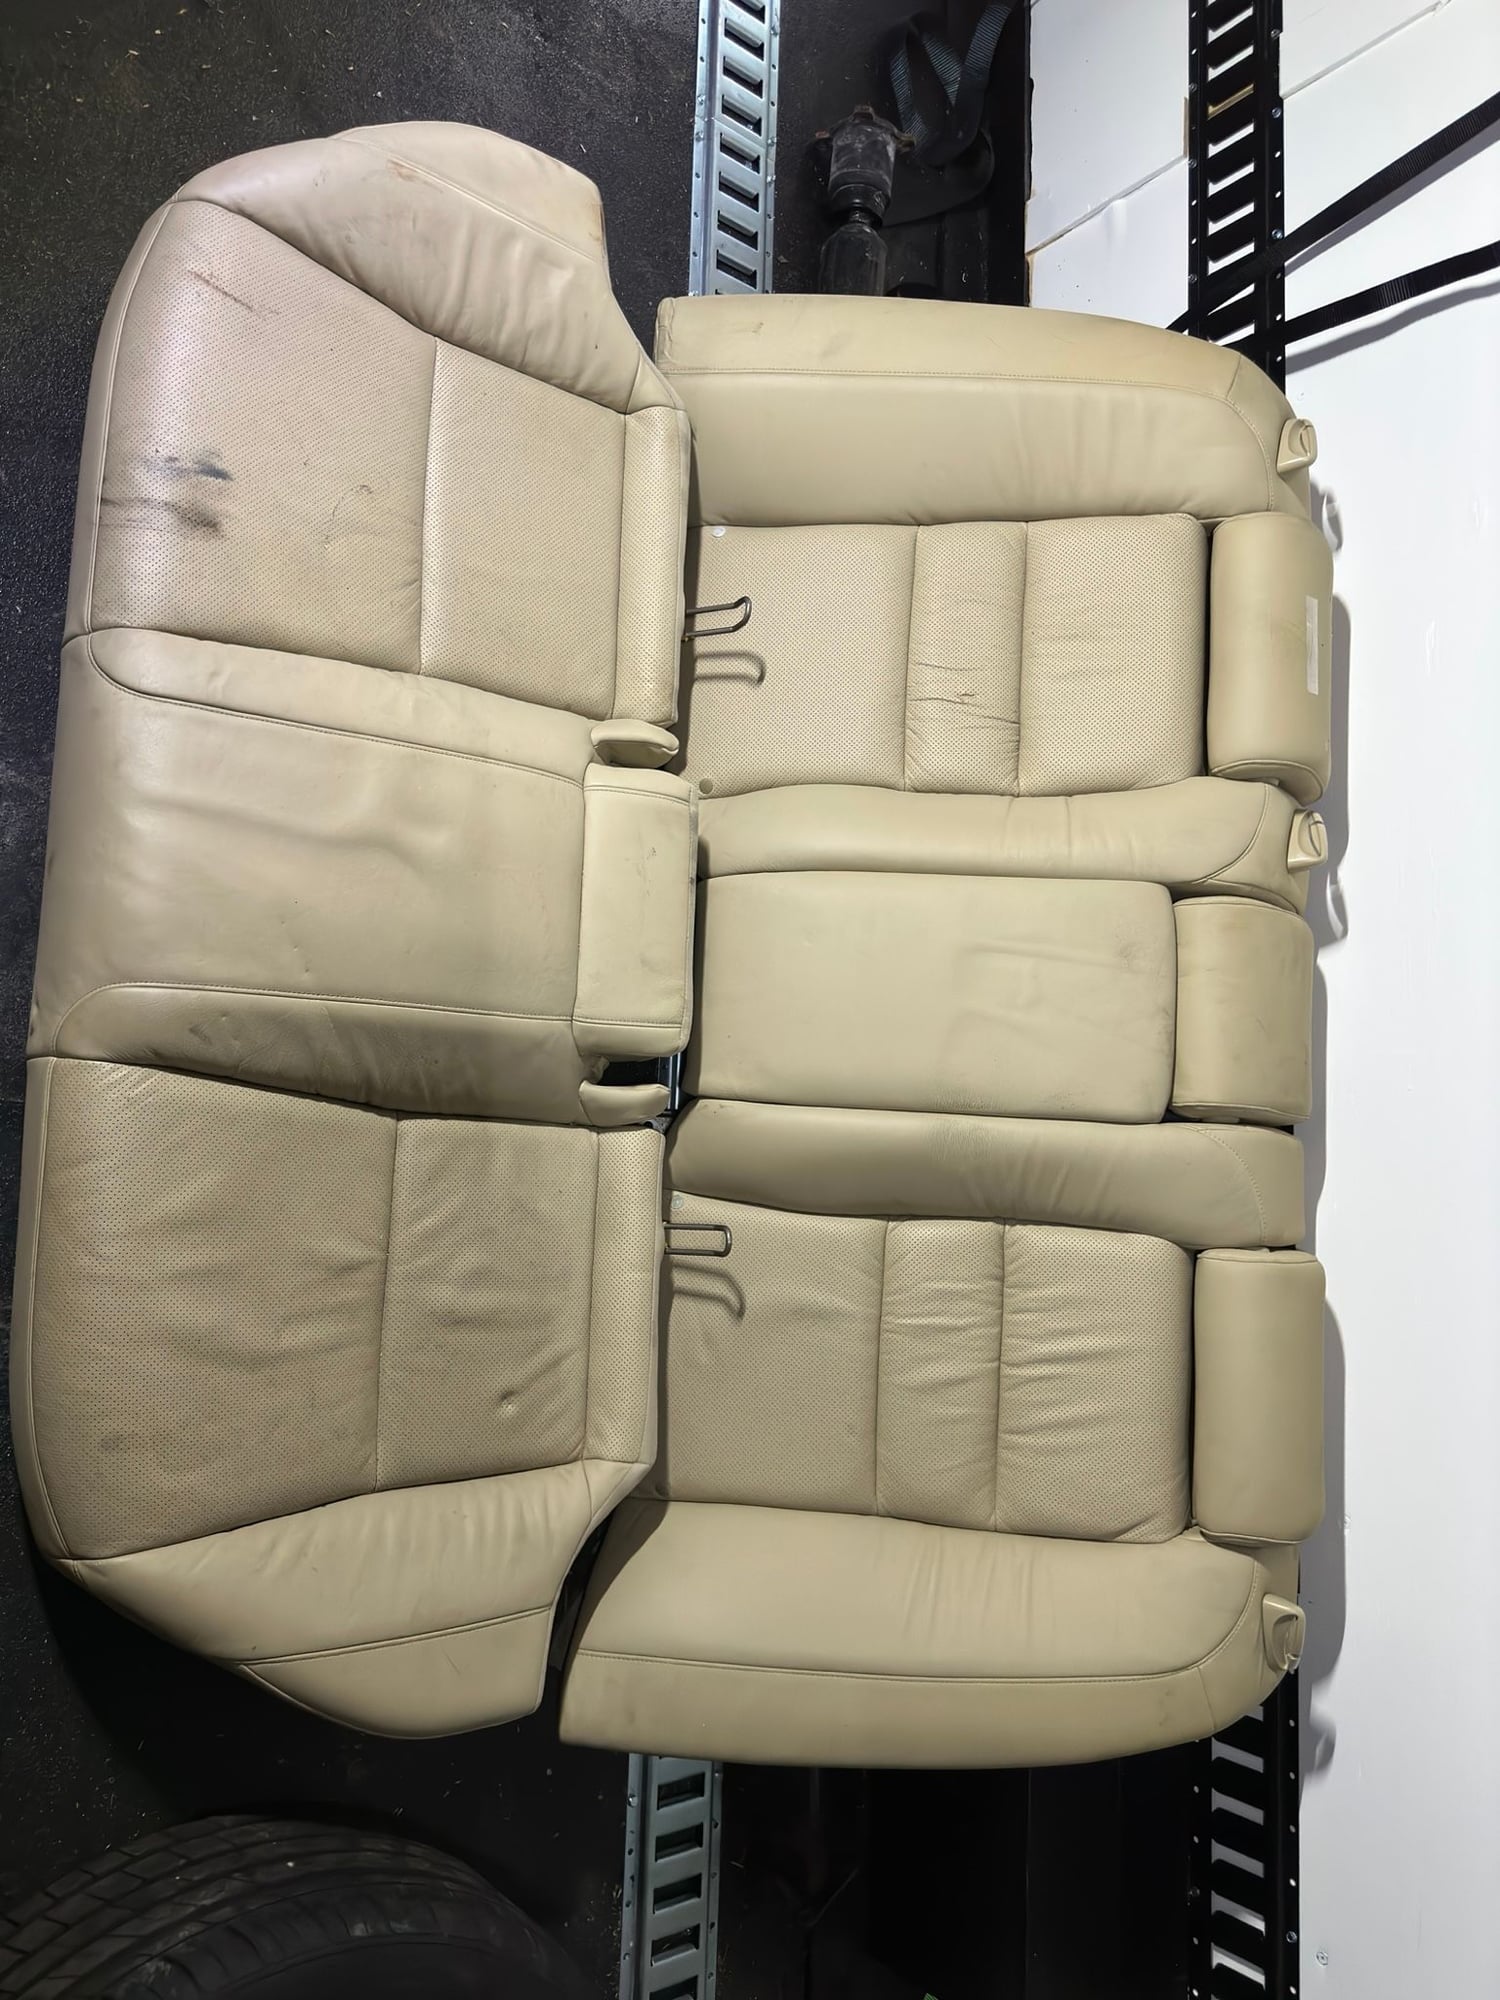 2006 Acura RL - REAR SEATS COMPLETE - Accessories - $150 - Katy, TX 77494, United States